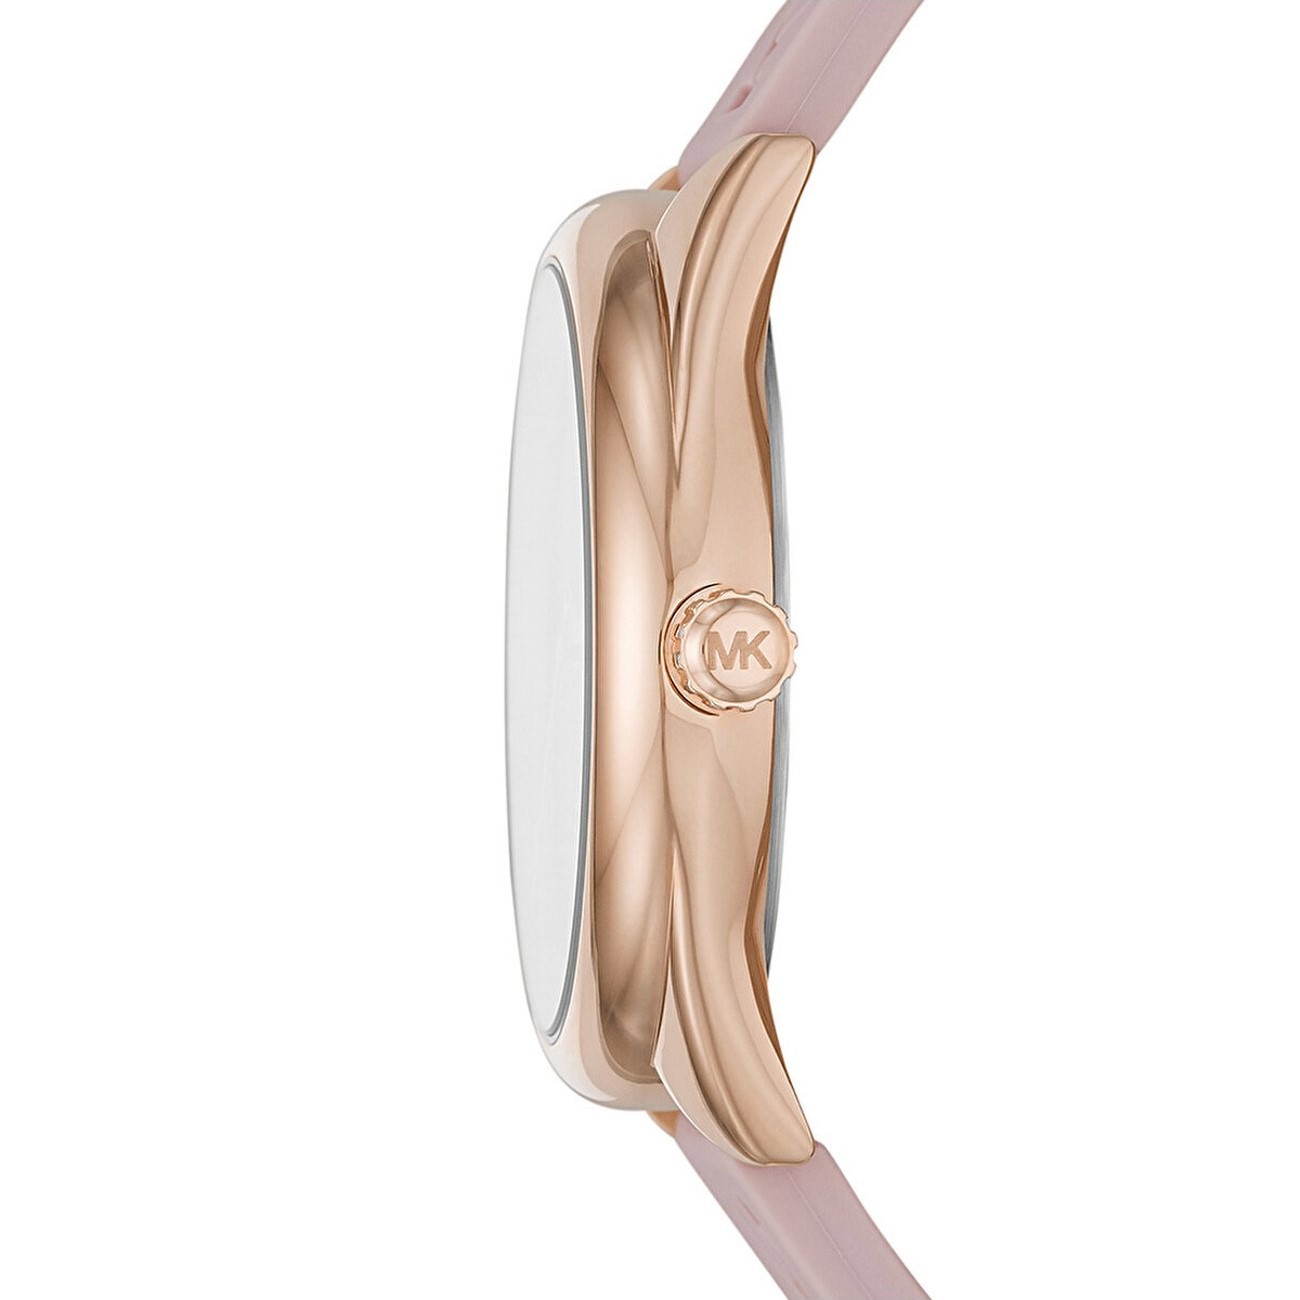 ĐỒNG HỒ NỮ MICHAEL KORS RUNWAY JANELLE ROSE GOLD PINK SILICONE WATCH MK7139 6